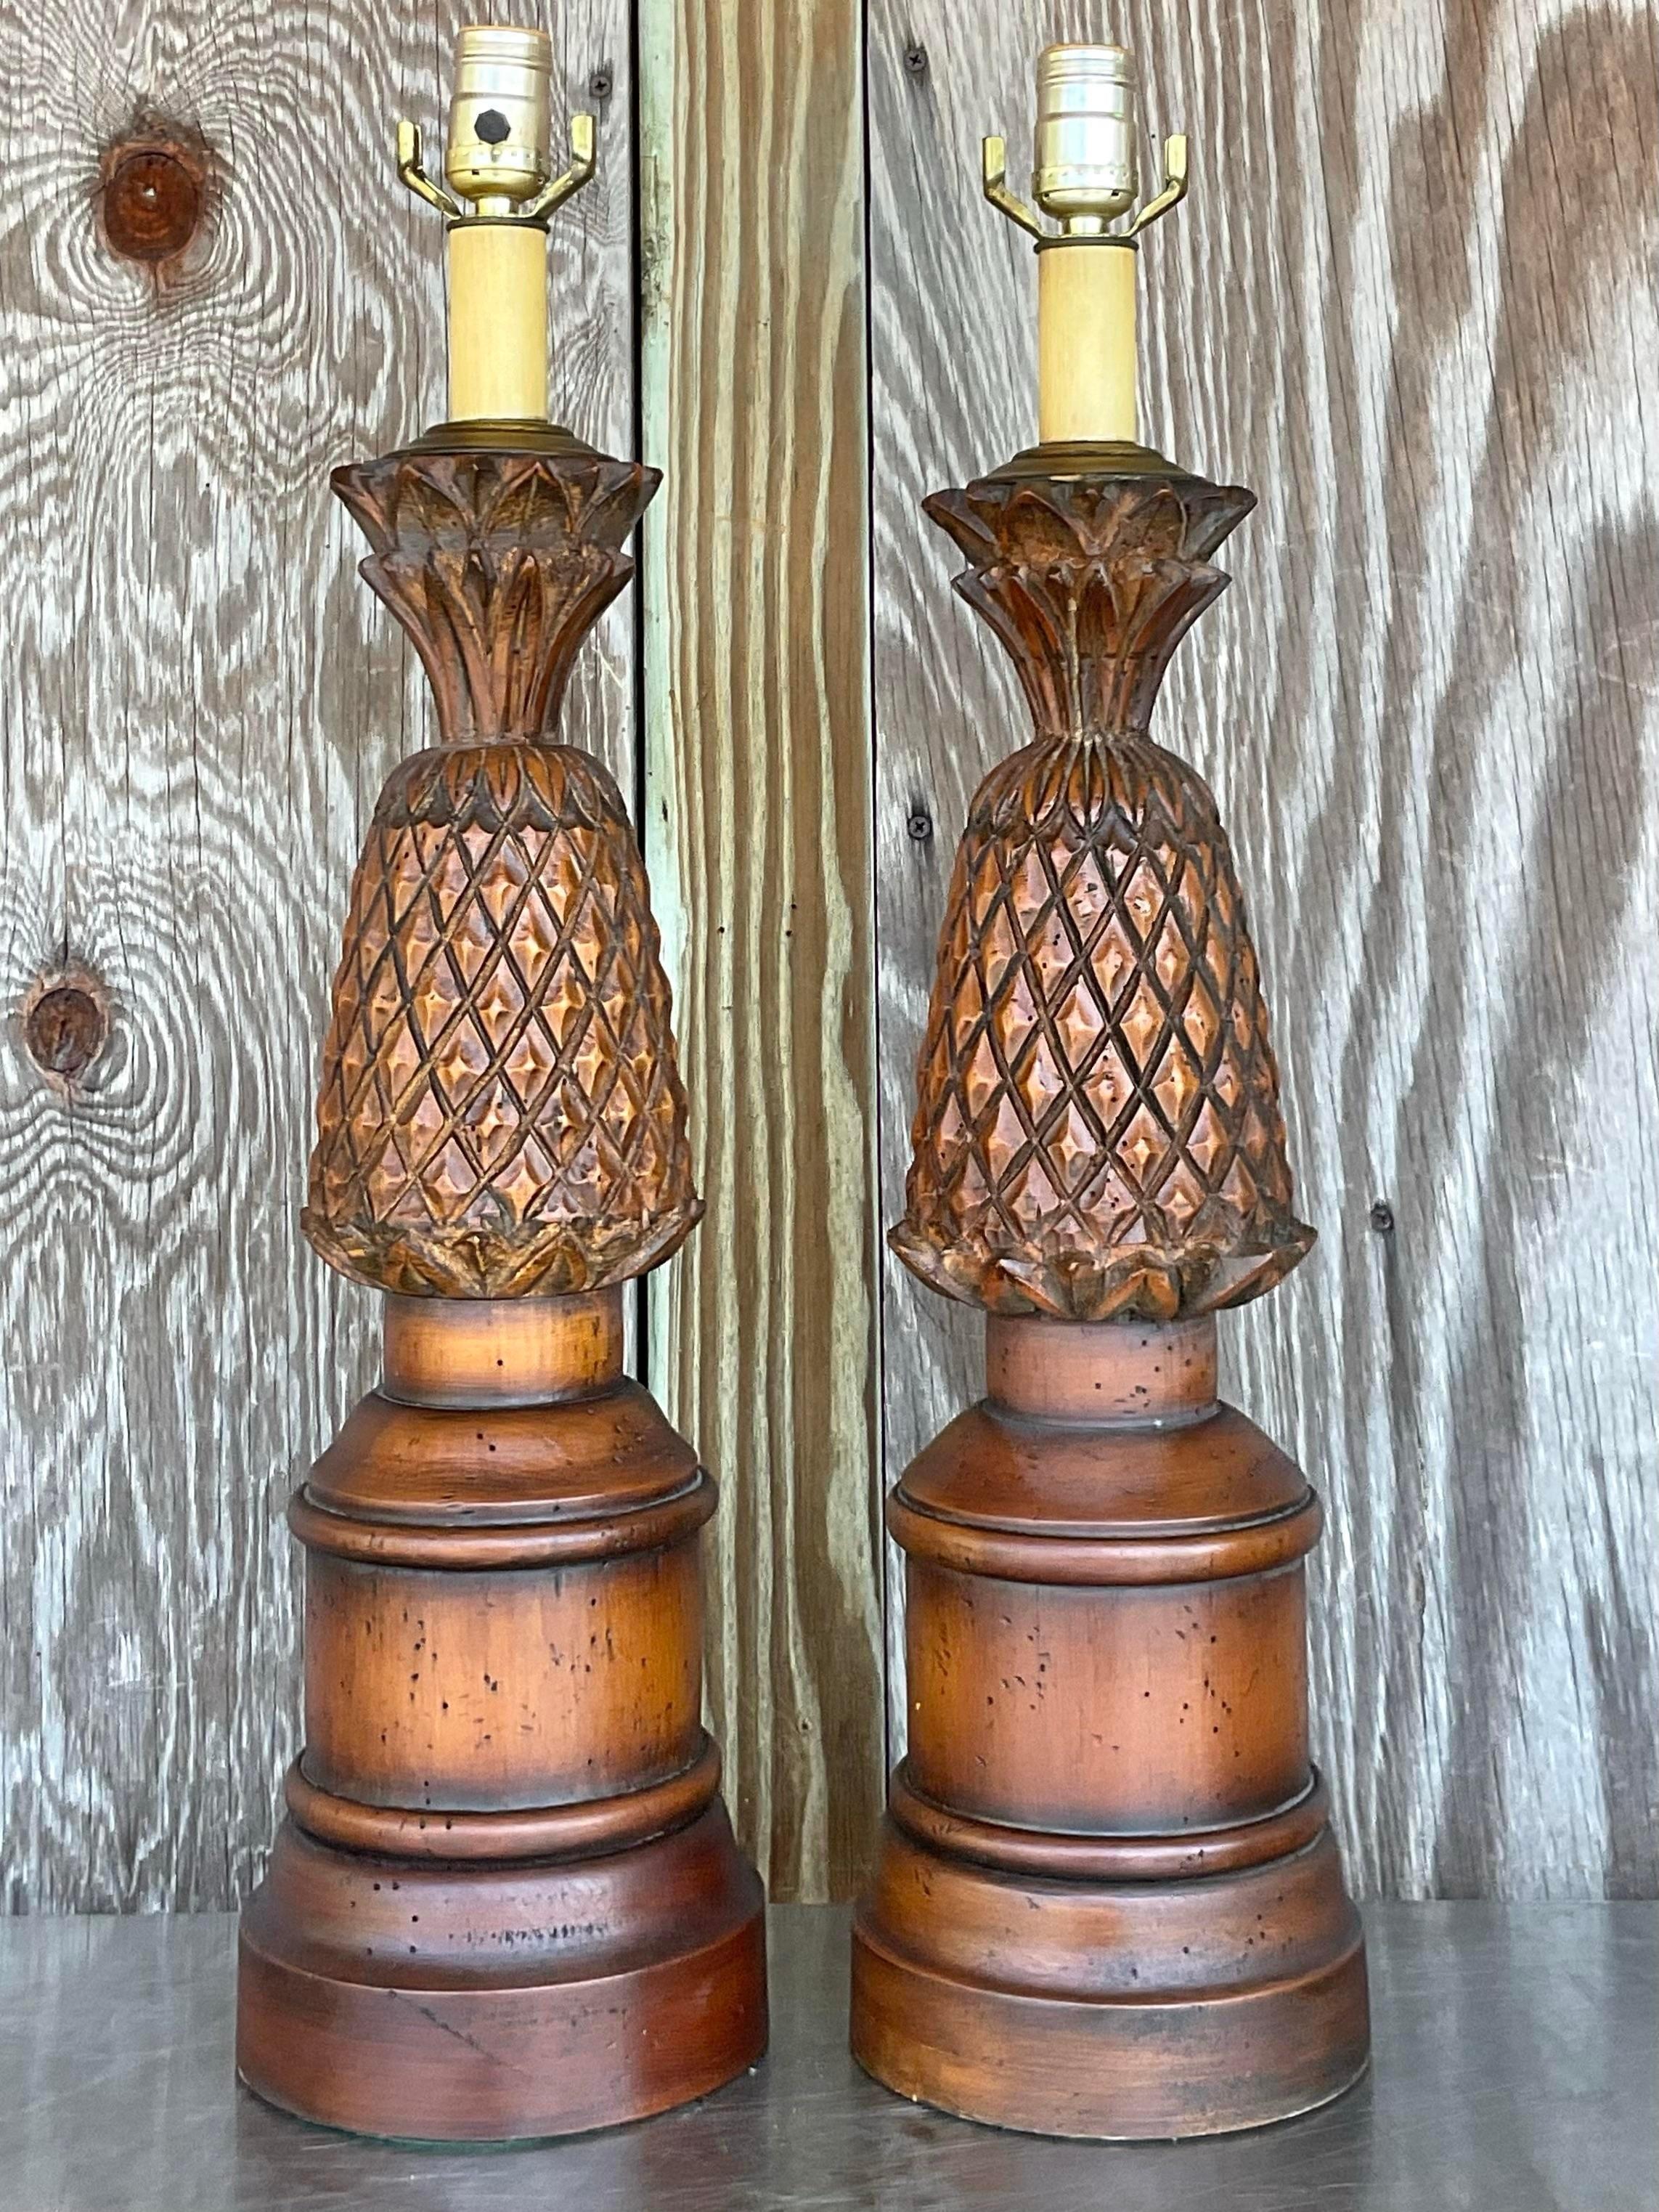 20th Century Vintage Boho Hand Carved Pineapple Lamps - a Pair For Sale